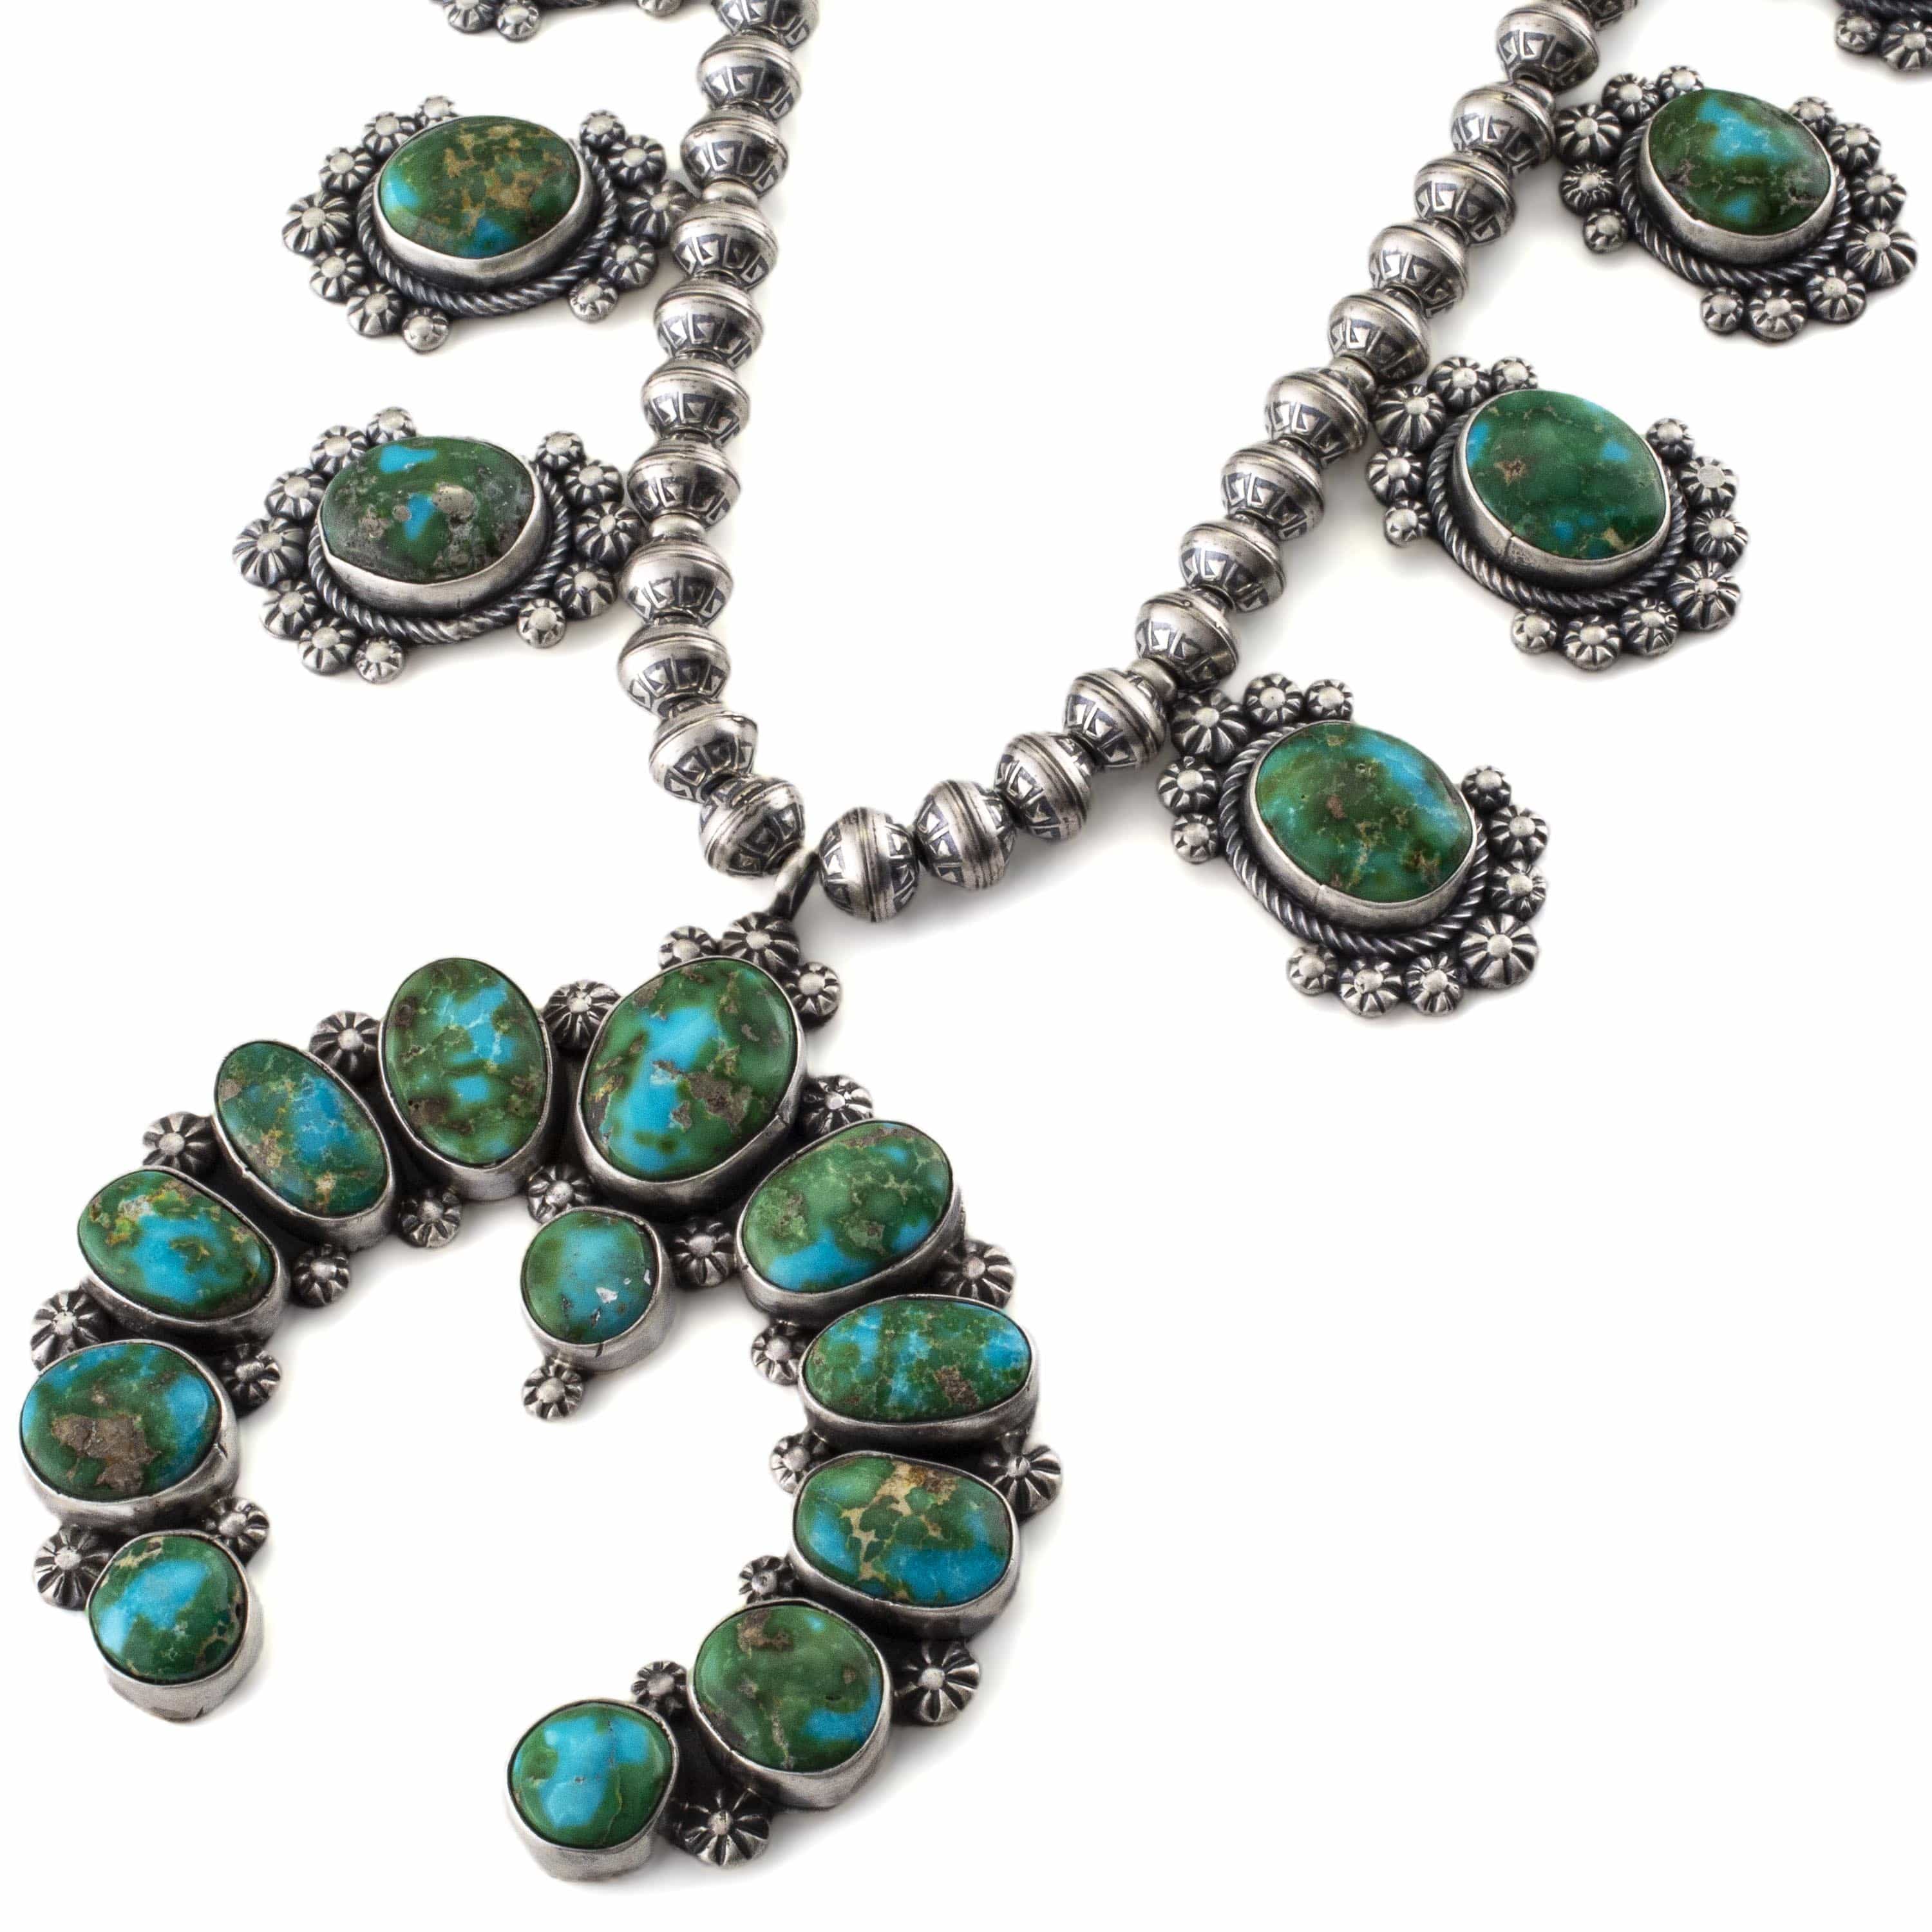 Kalifano Native American Jewelry Bea Tom Sonoran Gold Turquoise Squash Blossom USA Native American Made 925 Sterling Silver Necklace NAN15000.001